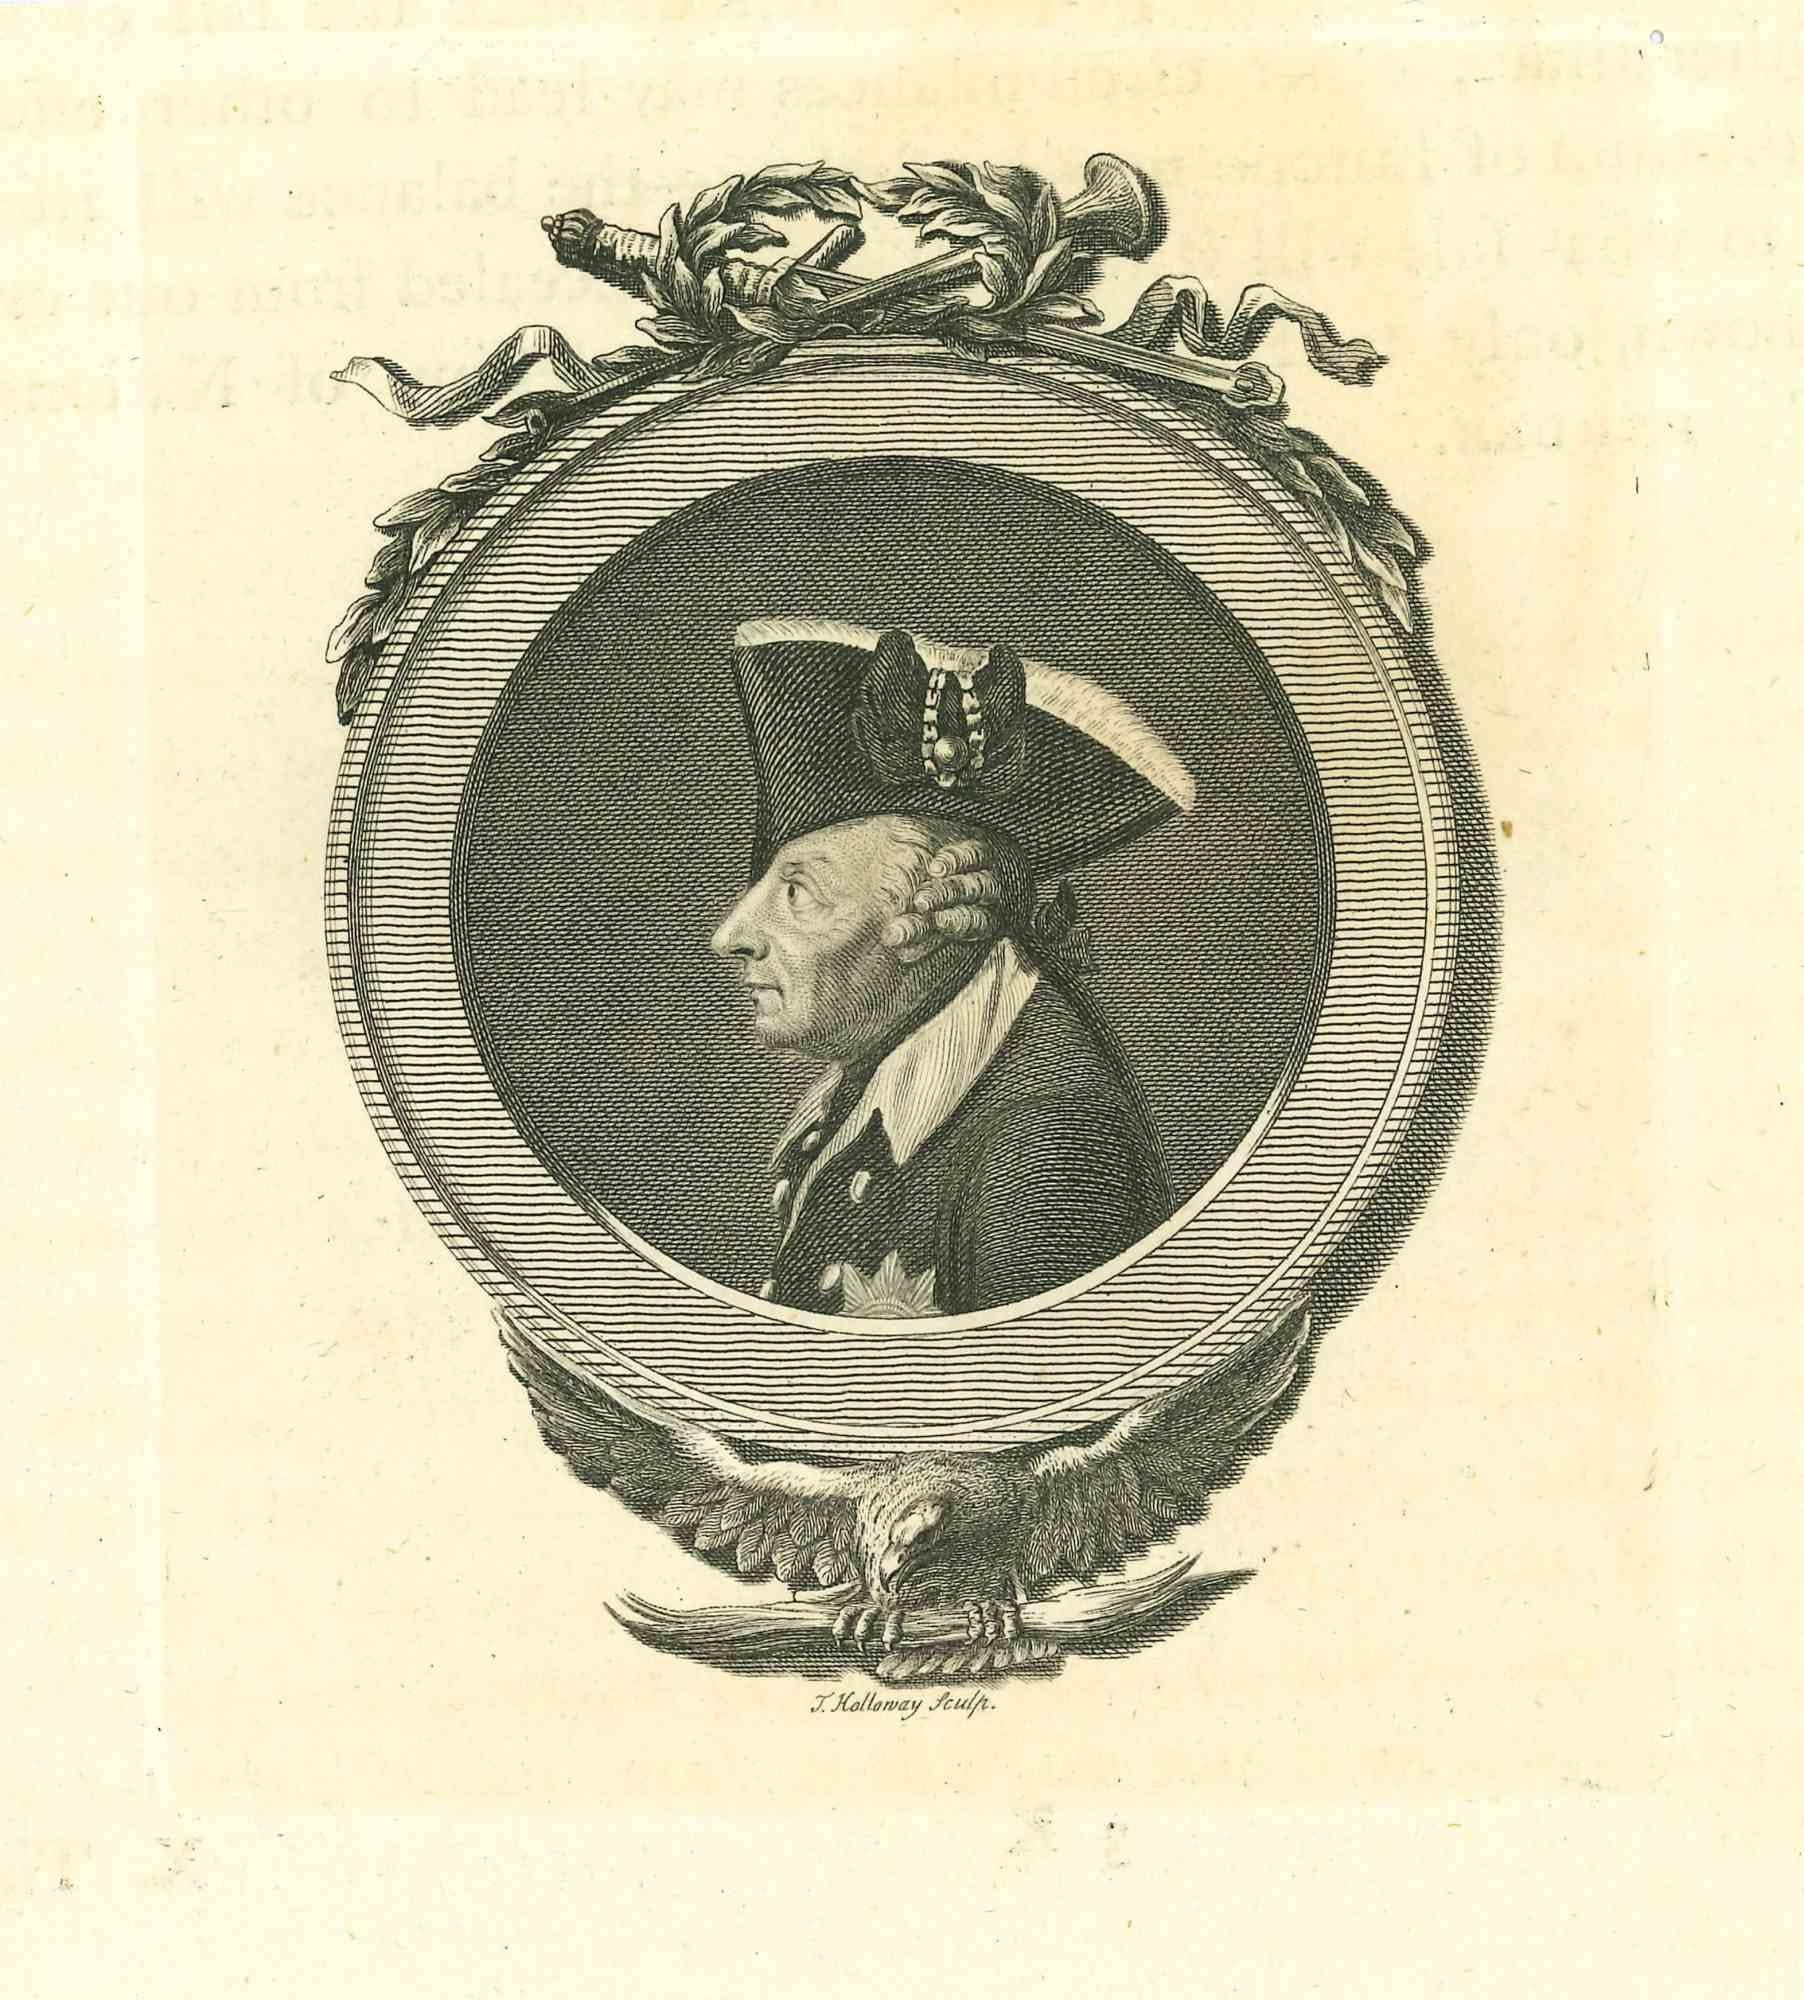 Profile is an original etching artwork realized by Thomas Holloway for Johann Caspar Lavater's "Essays on Physiognomy, Designed to Promote the Knowledge and the Love of Mankind", London, Bensley, 1810. 

Signed on the plated on the lower.

With the